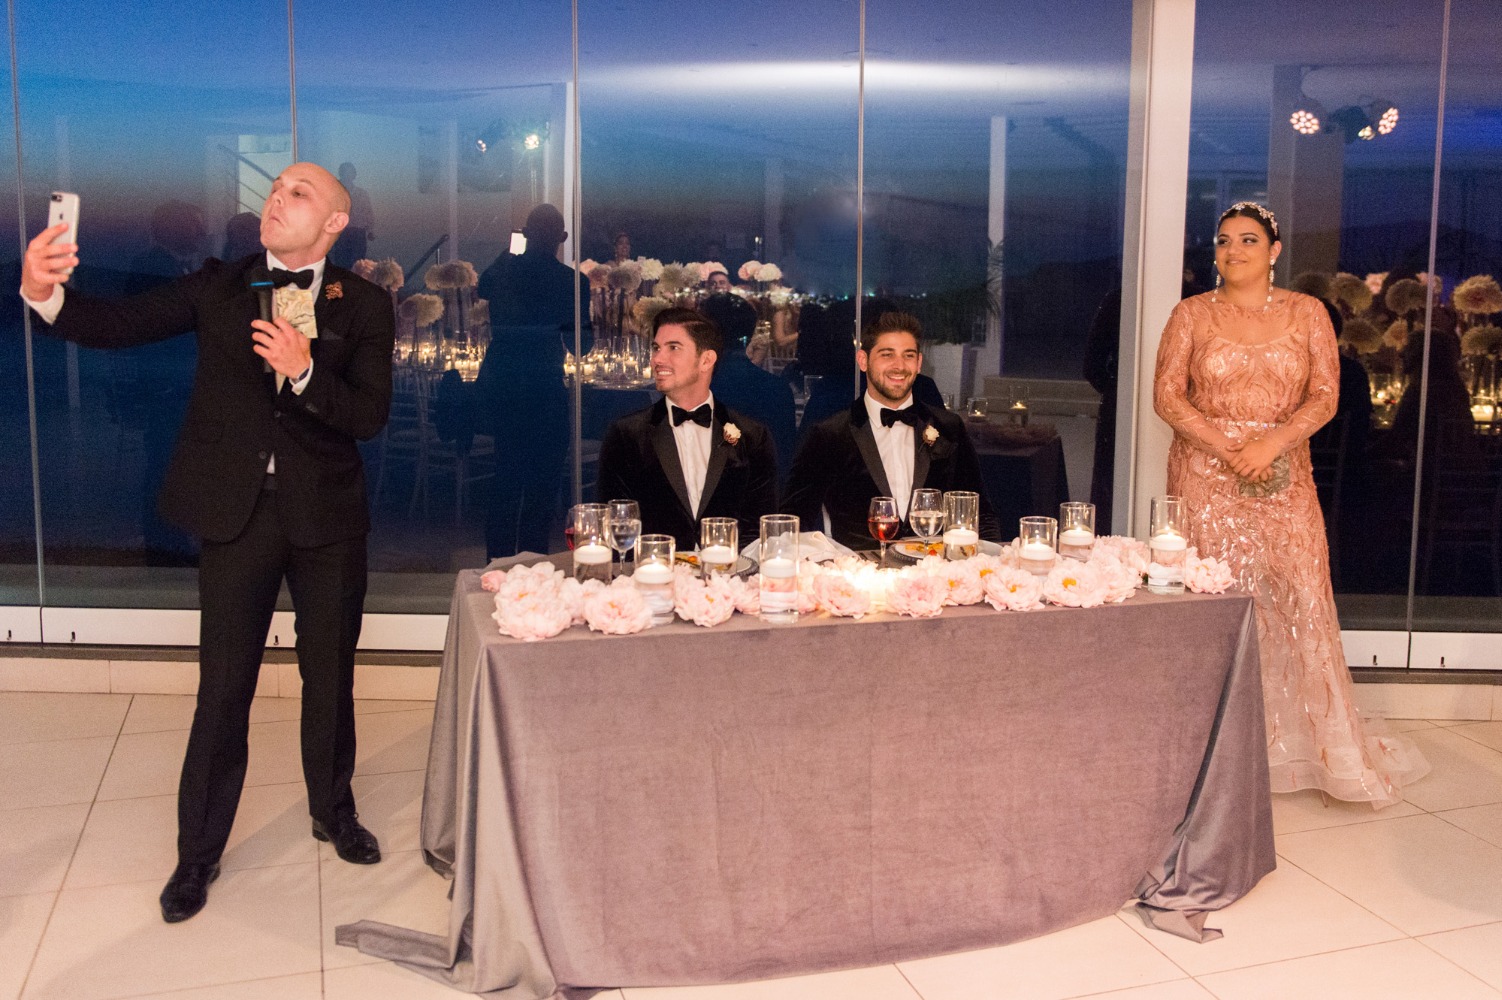 these-two-grooms-had-eight-bridesmaids